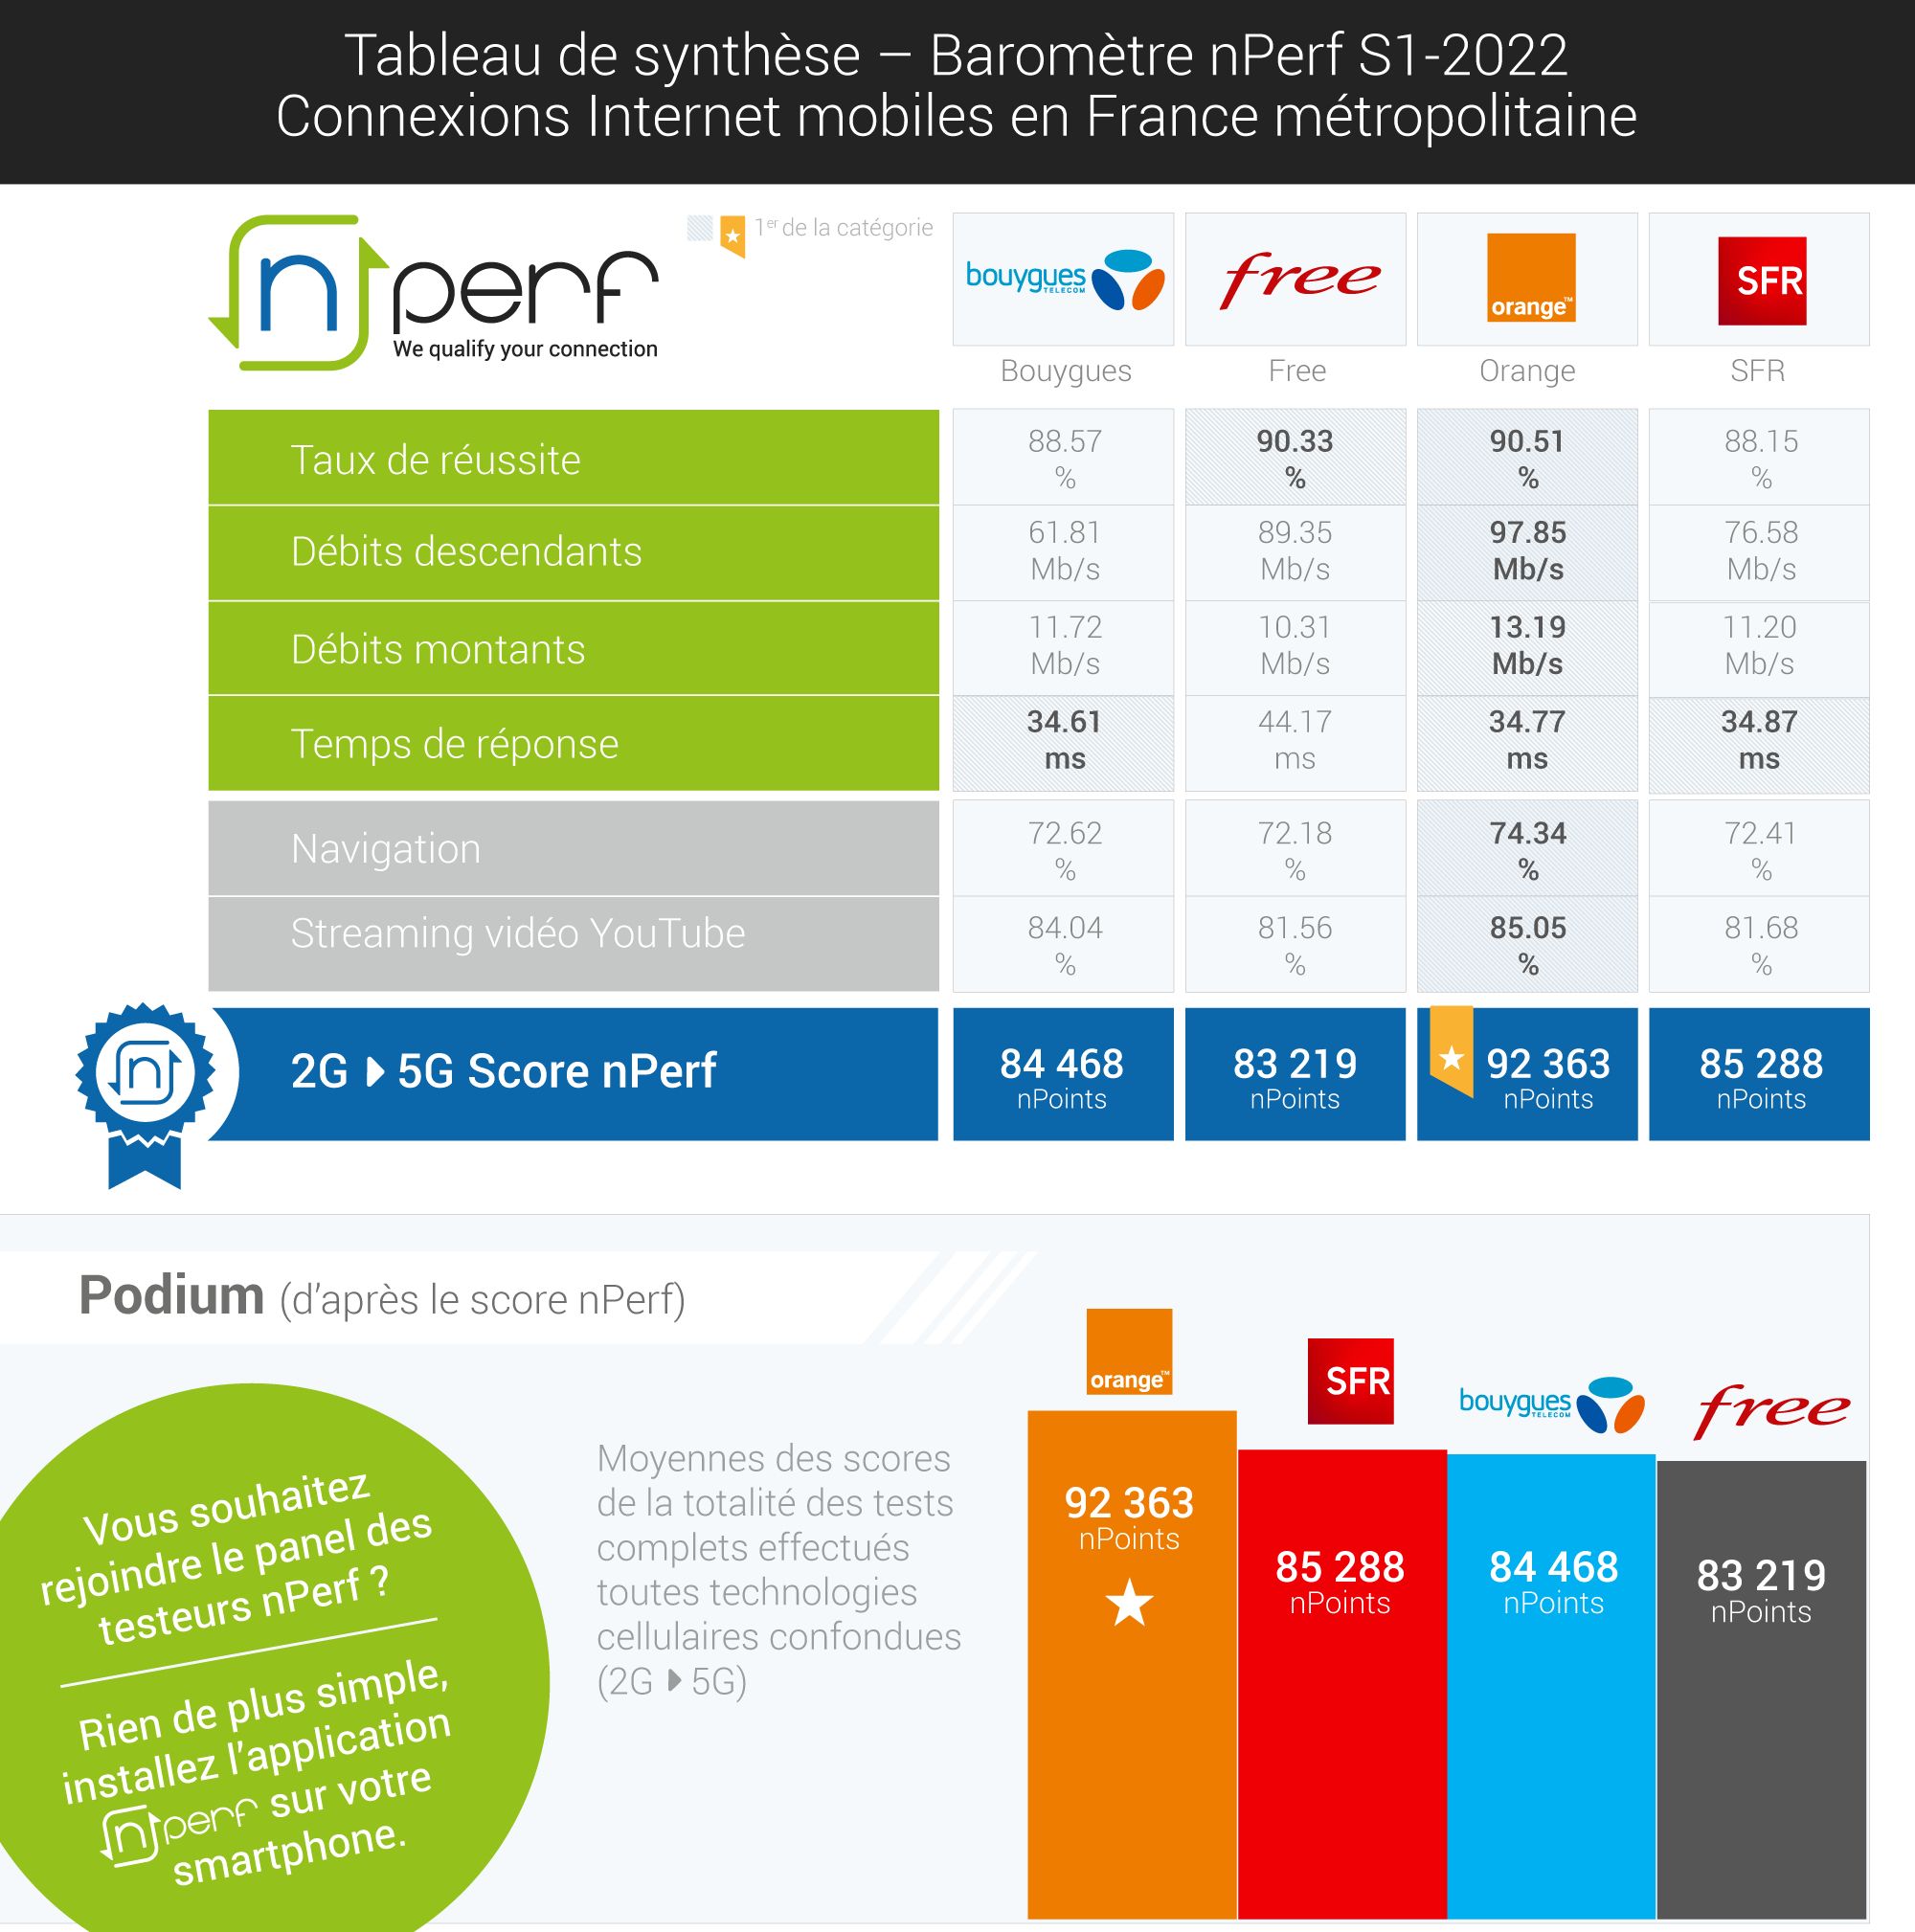 nperf-s1-2022-global-mobile-connections-barometer